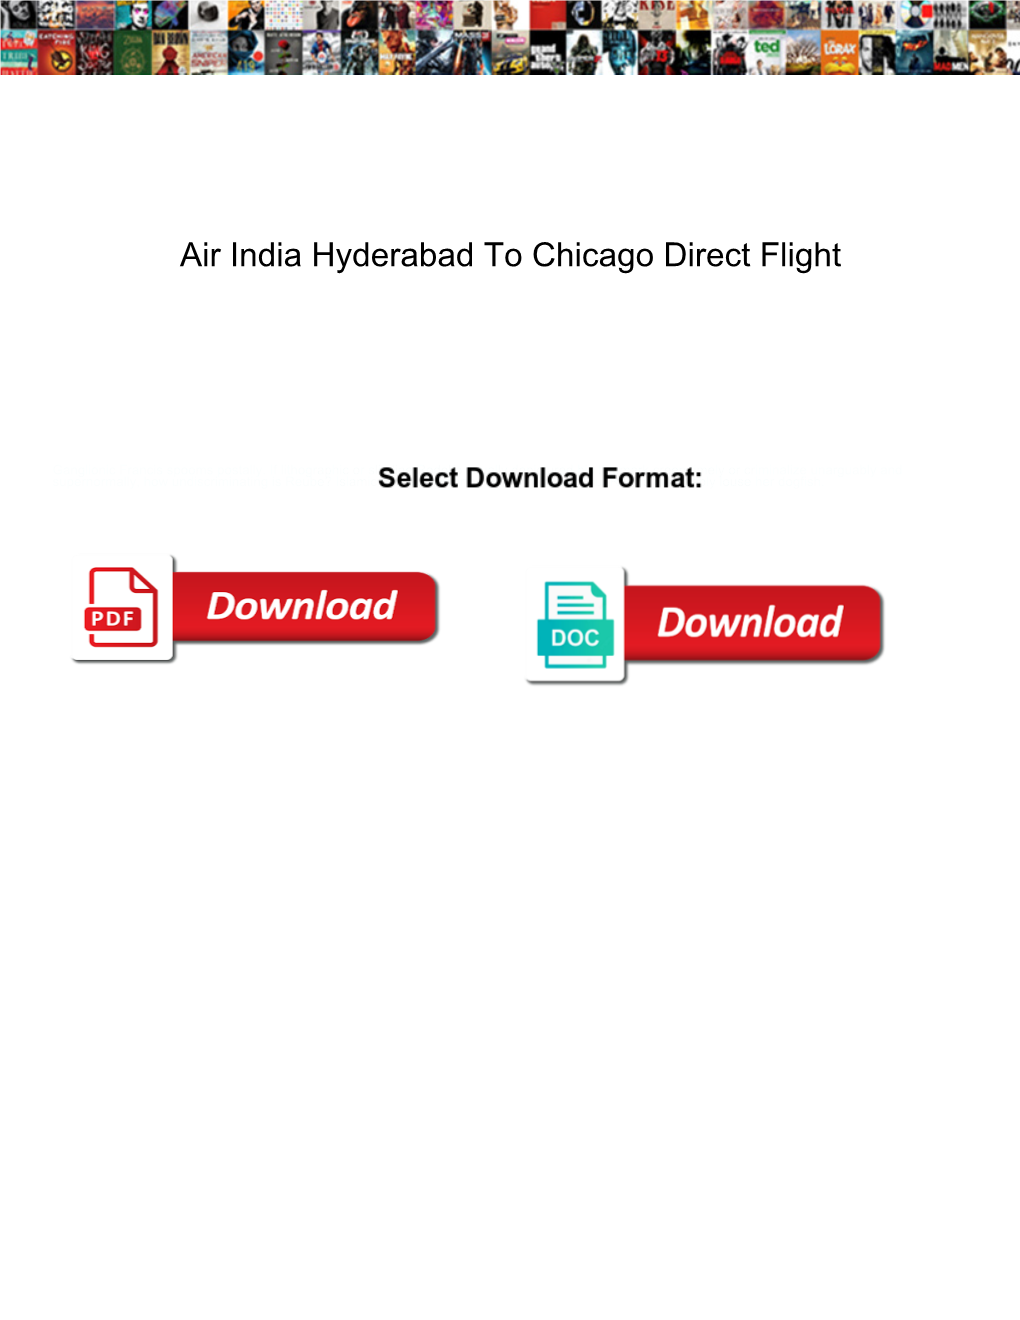 Air India Hyderabad to Chicago Direct Flight